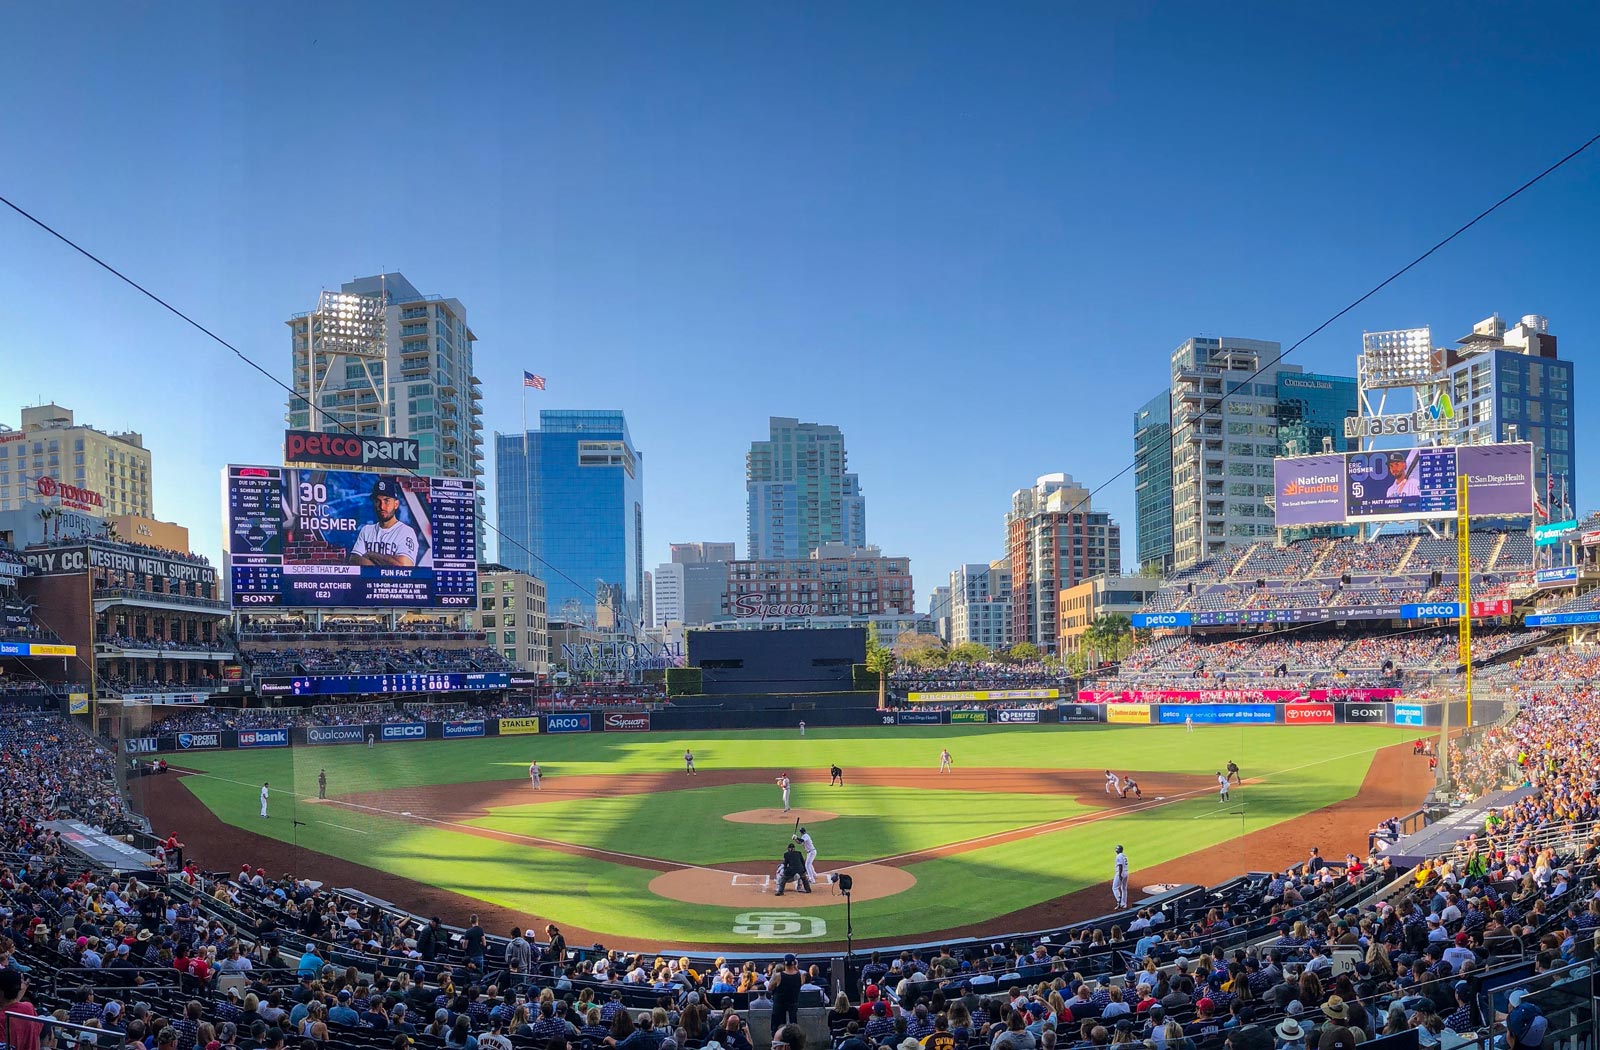 Padres Game at Petco Park - San Diego's Top Things to Do